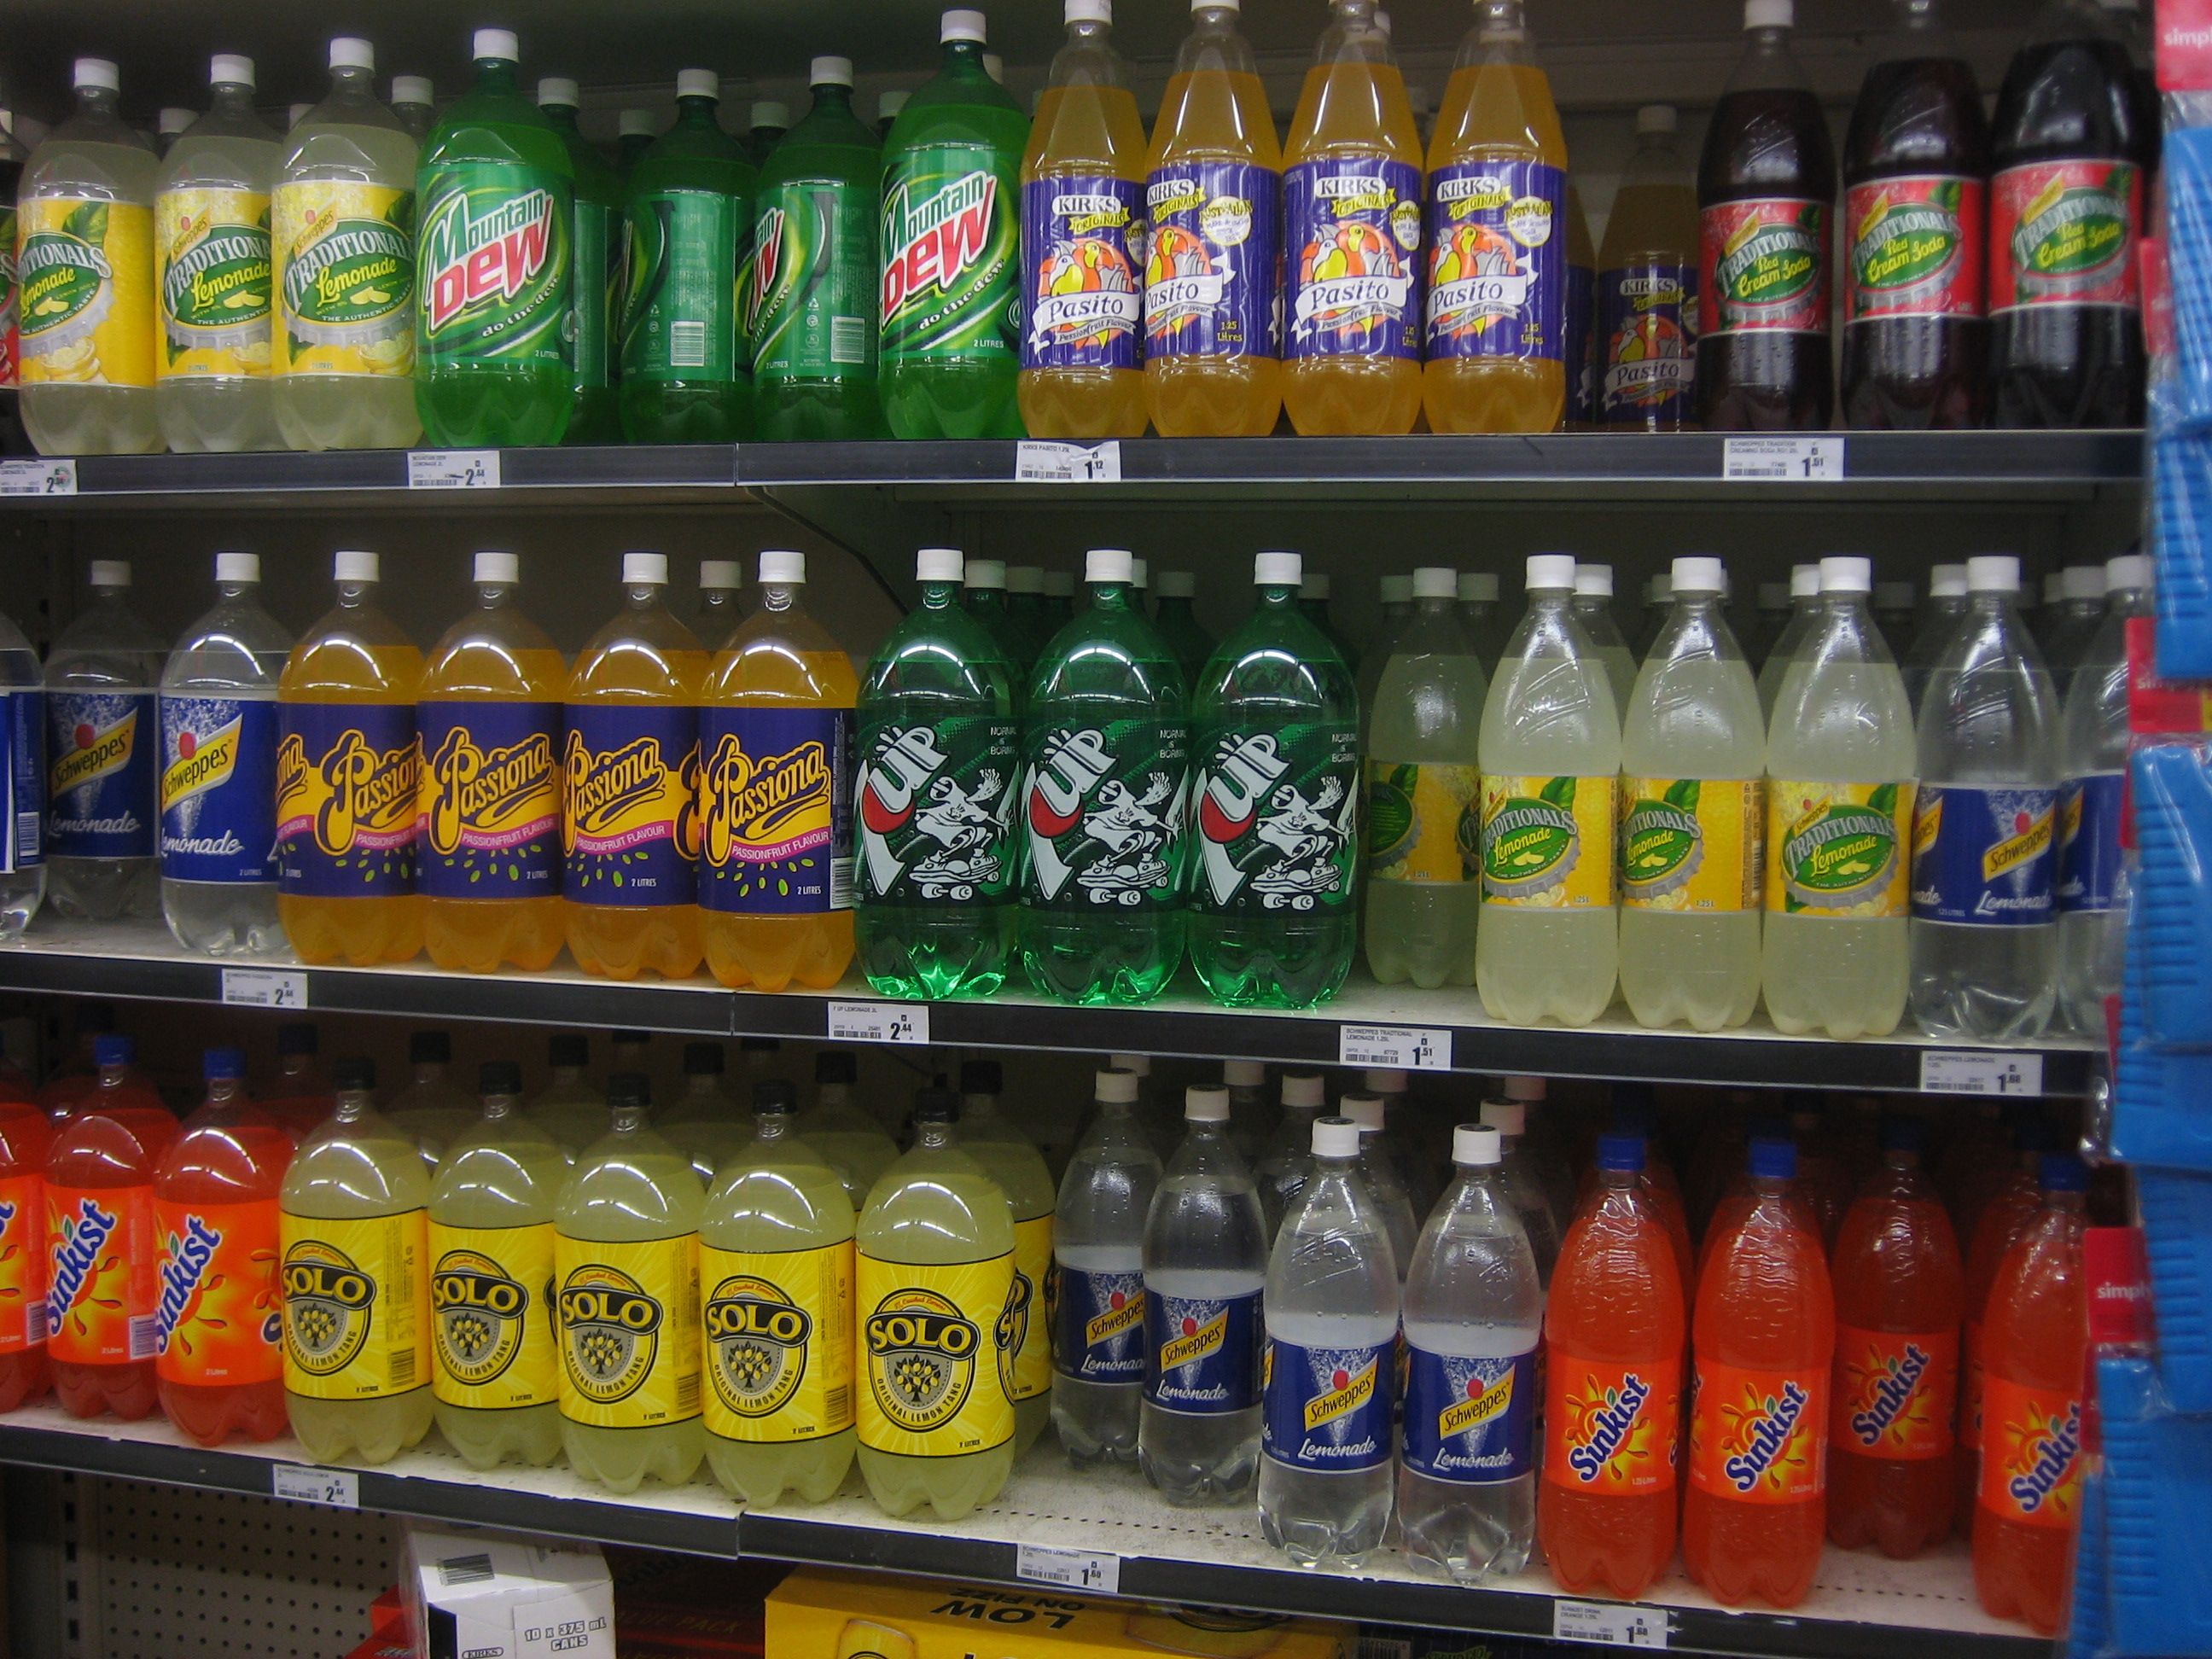 Sodas and other beverages filled with sugar are often cheaper than healthier alternatives without the sugar tax. Photo from Wikimedia Commons.